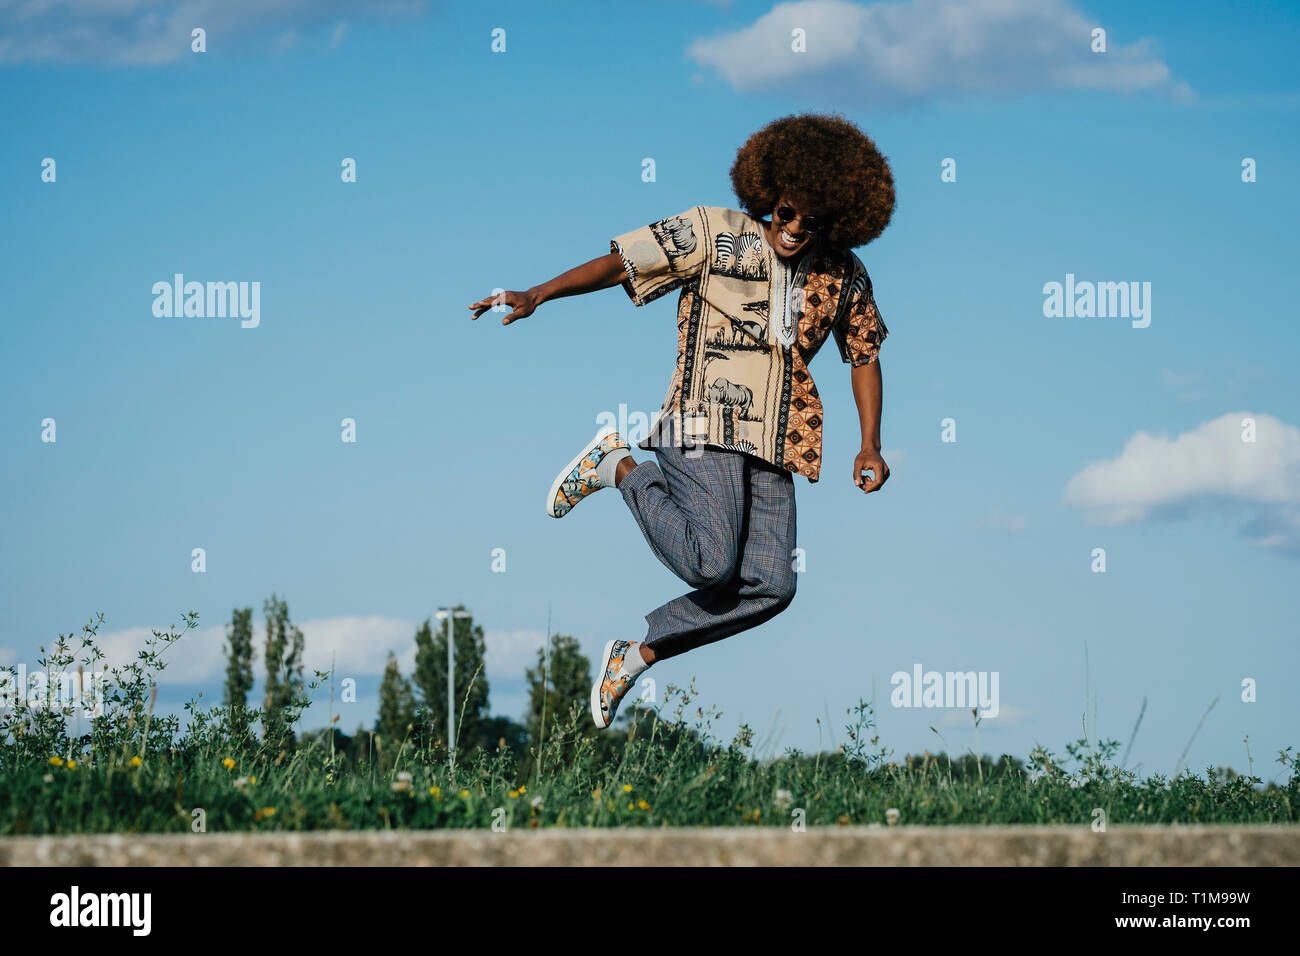 Carefree young man with afro jumping for joy Stock Photo